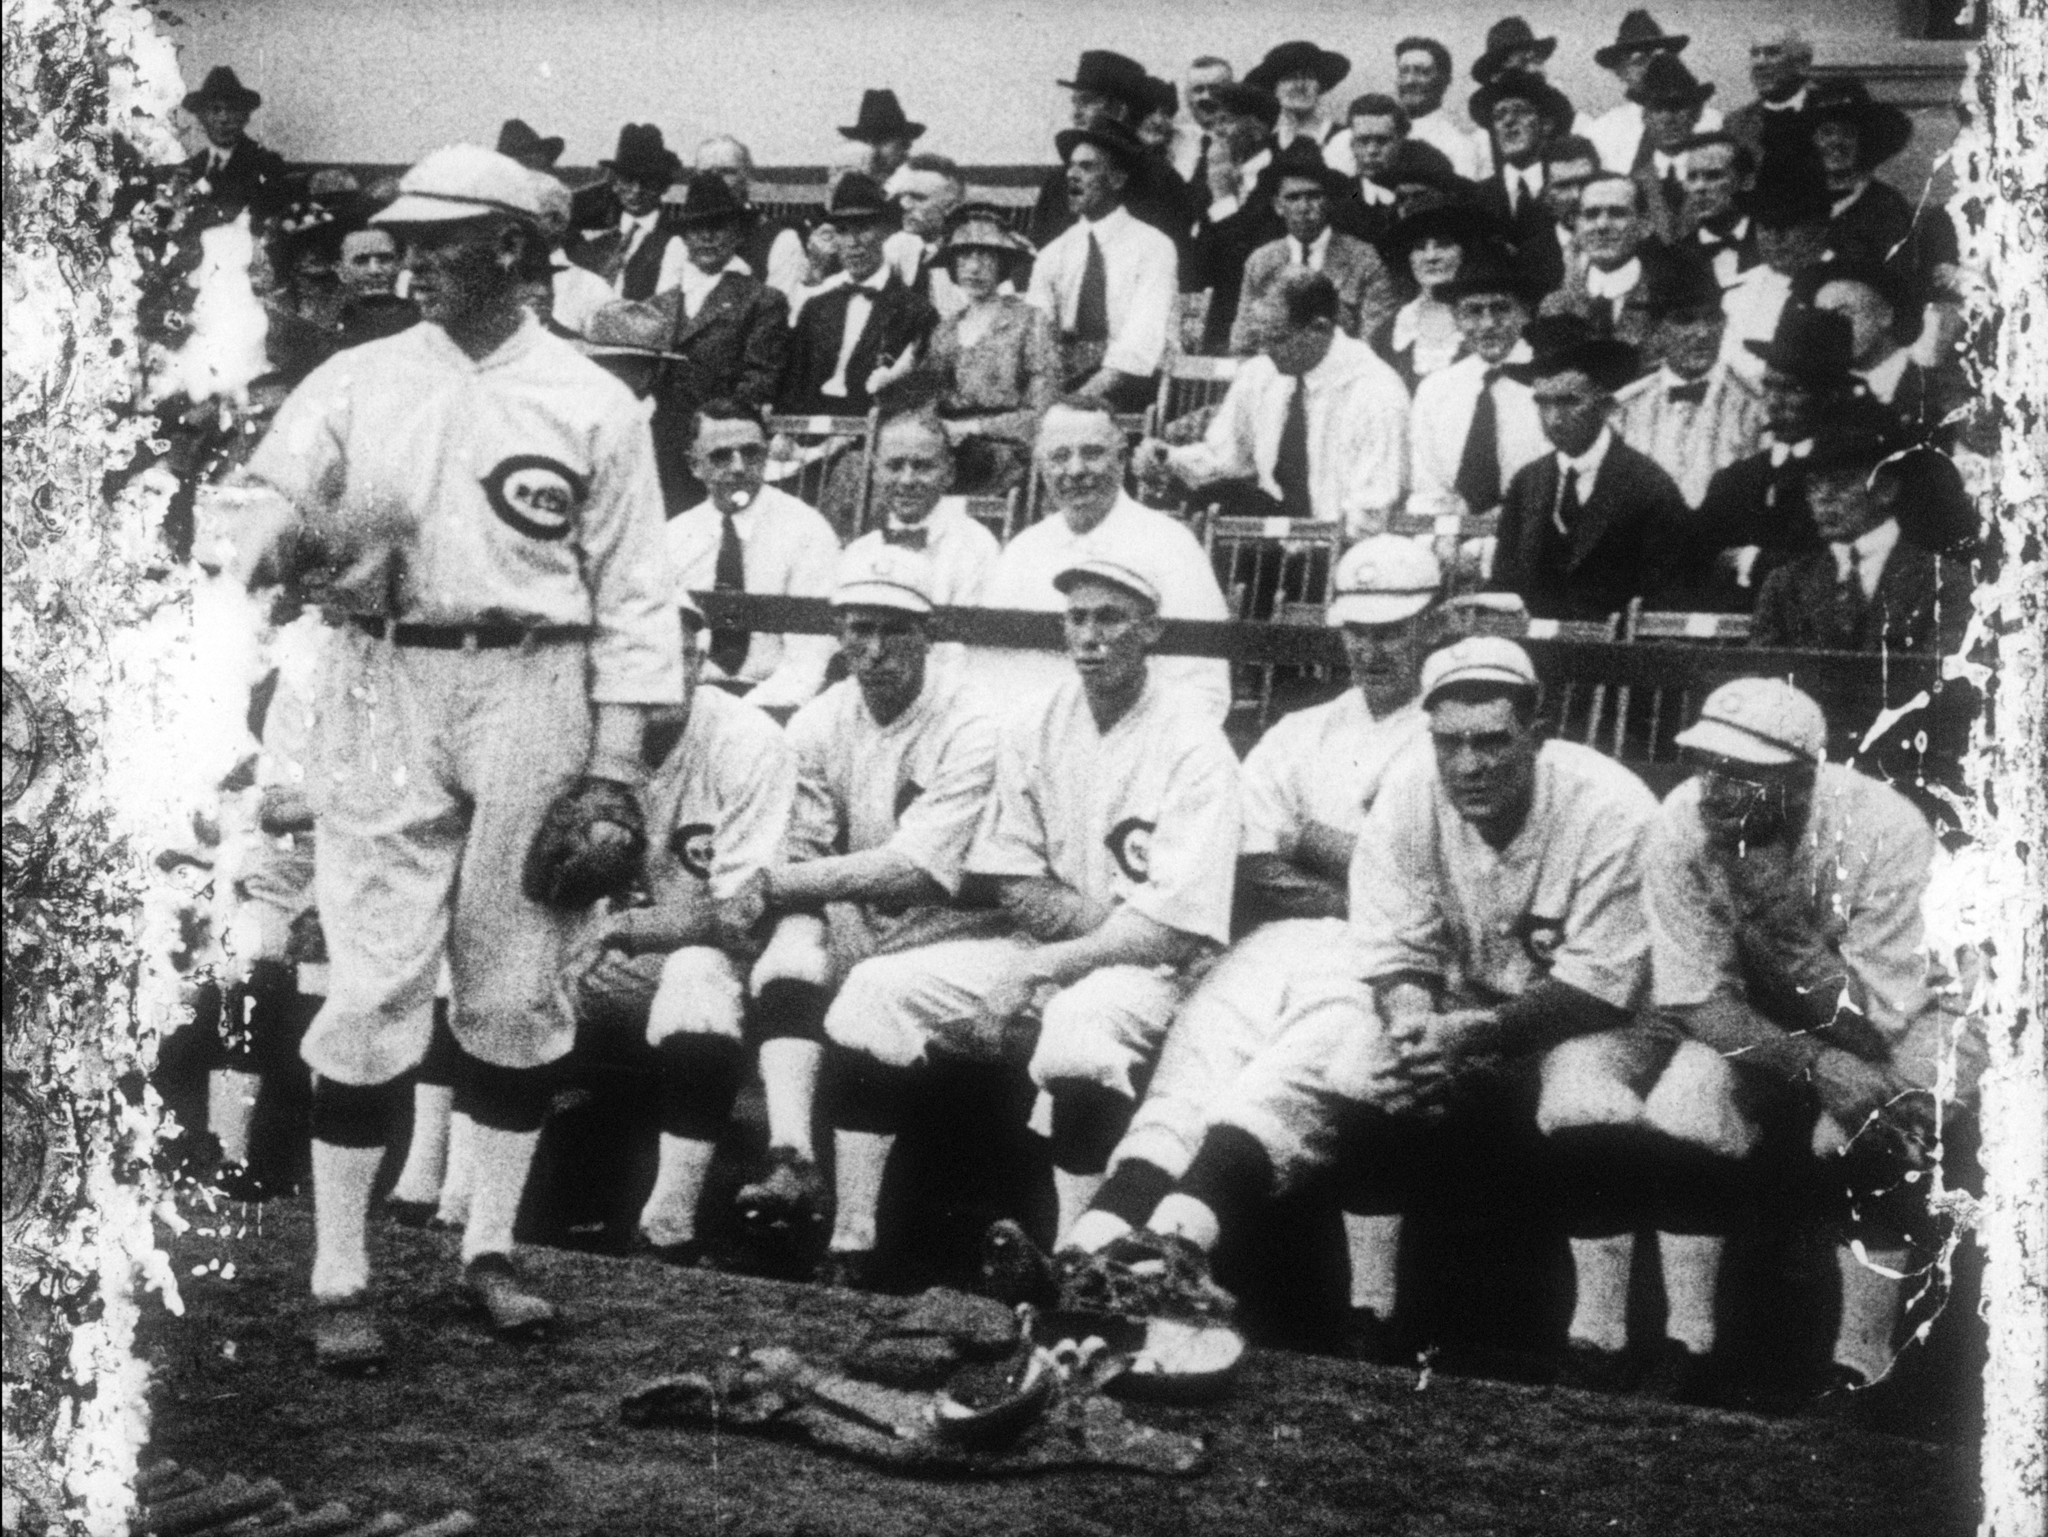 Newspapers.com - As part of the unfolding Black Sox scandal, 8 Chicago  White Sox players were indicted on September 28, 1920, on charges of  throwing the 1919 World Series. The scandal made